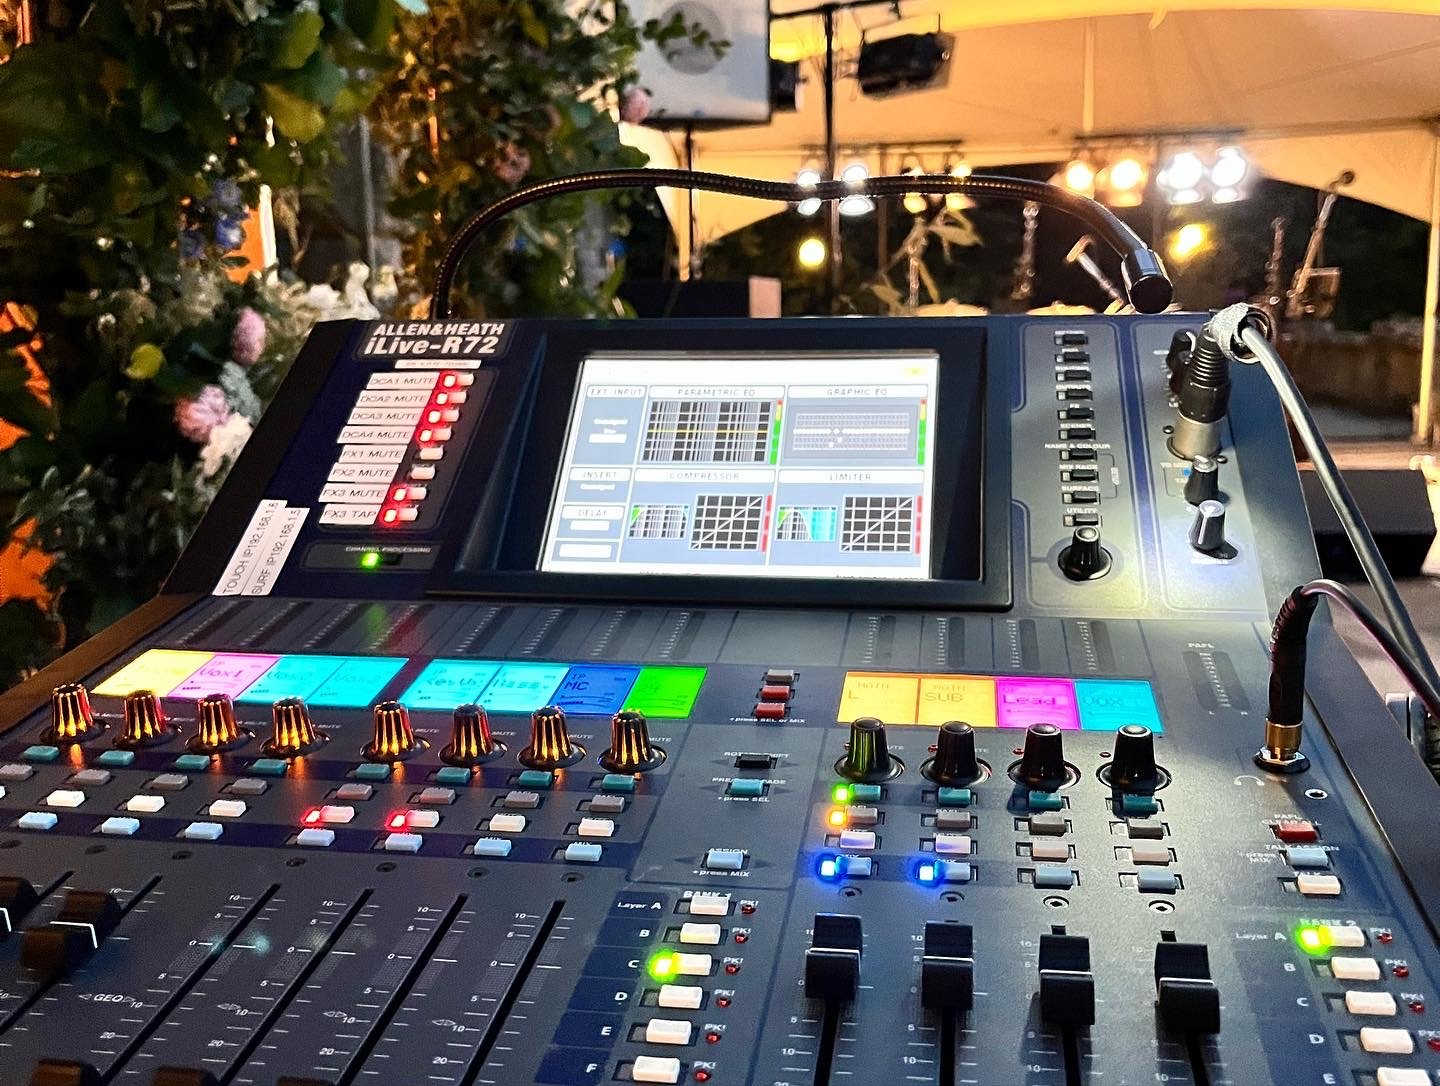 Allen & Heath iLive R72 Mixer ready to mix Ten Souljers performing live at a private wedding at Hatley Castle Victoria, 2022